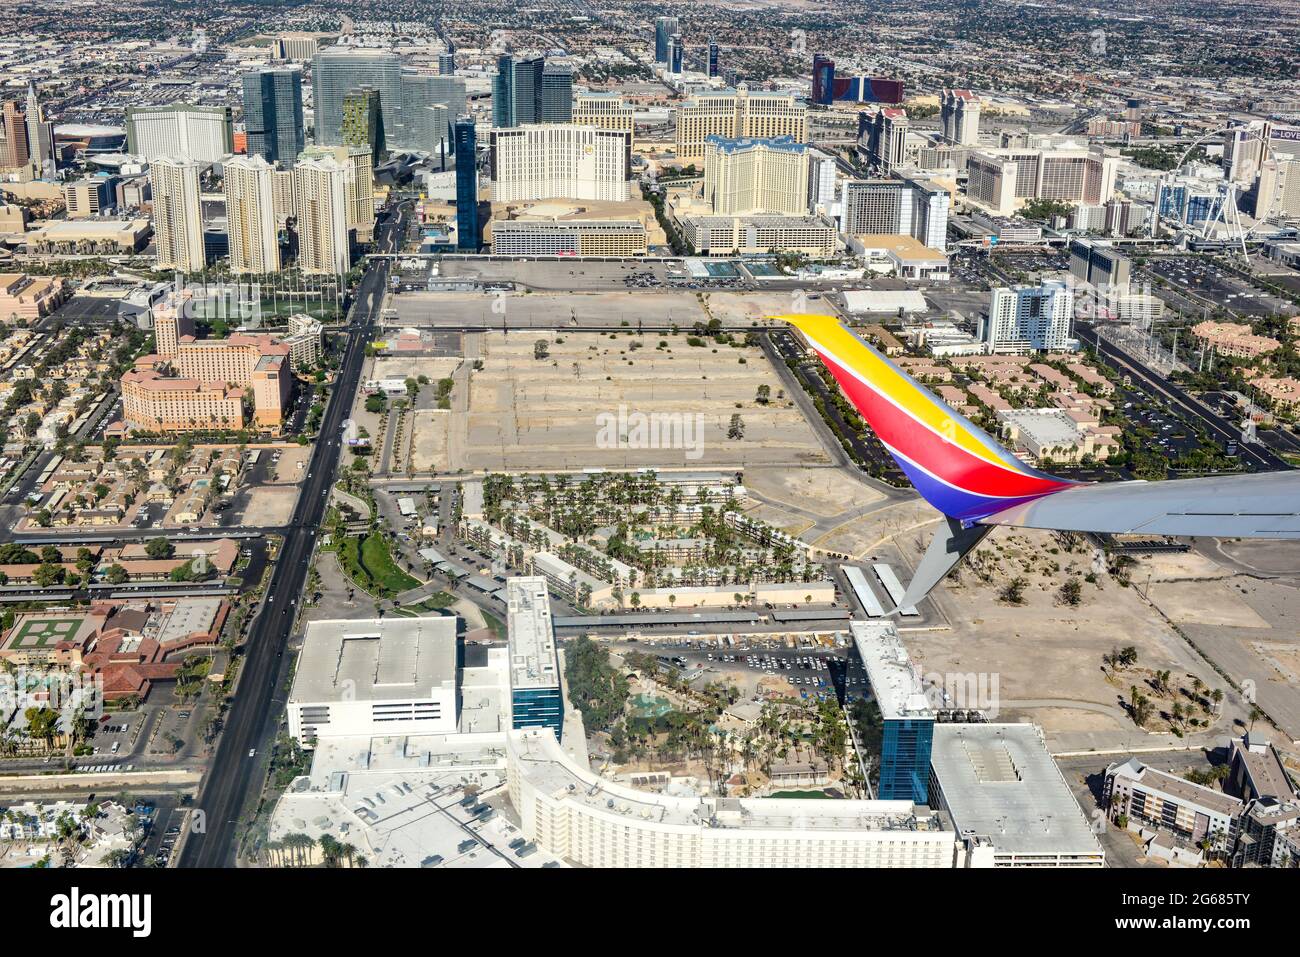 A jet wing tip of an 780 Max airplane in the foreground of an aerial view of the  Vegas strip area soon after liftoff from Las Vegas McCarran Internat Stock Photo